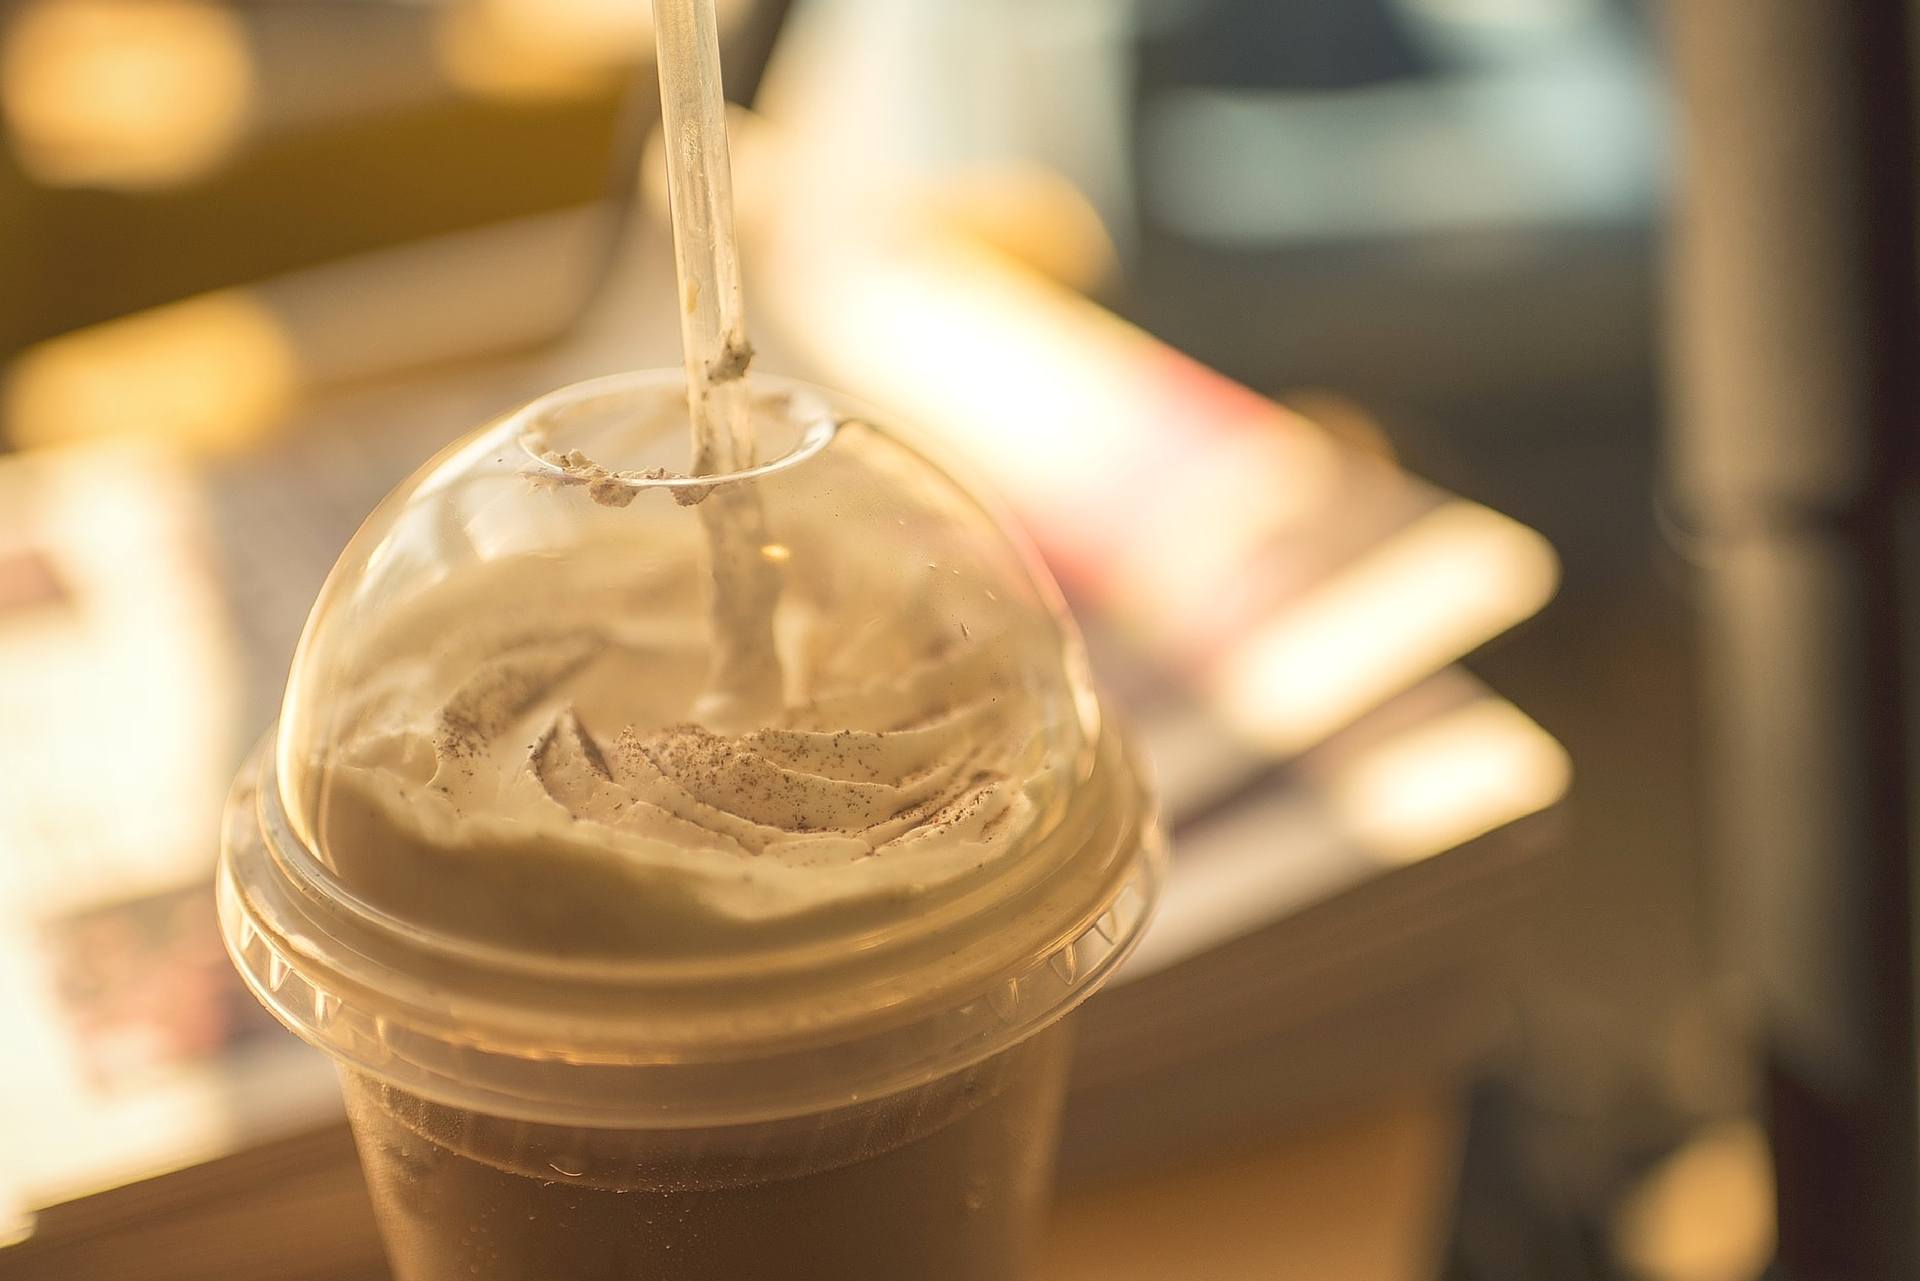 The calories in a fancy blended coffee can add up quickly.